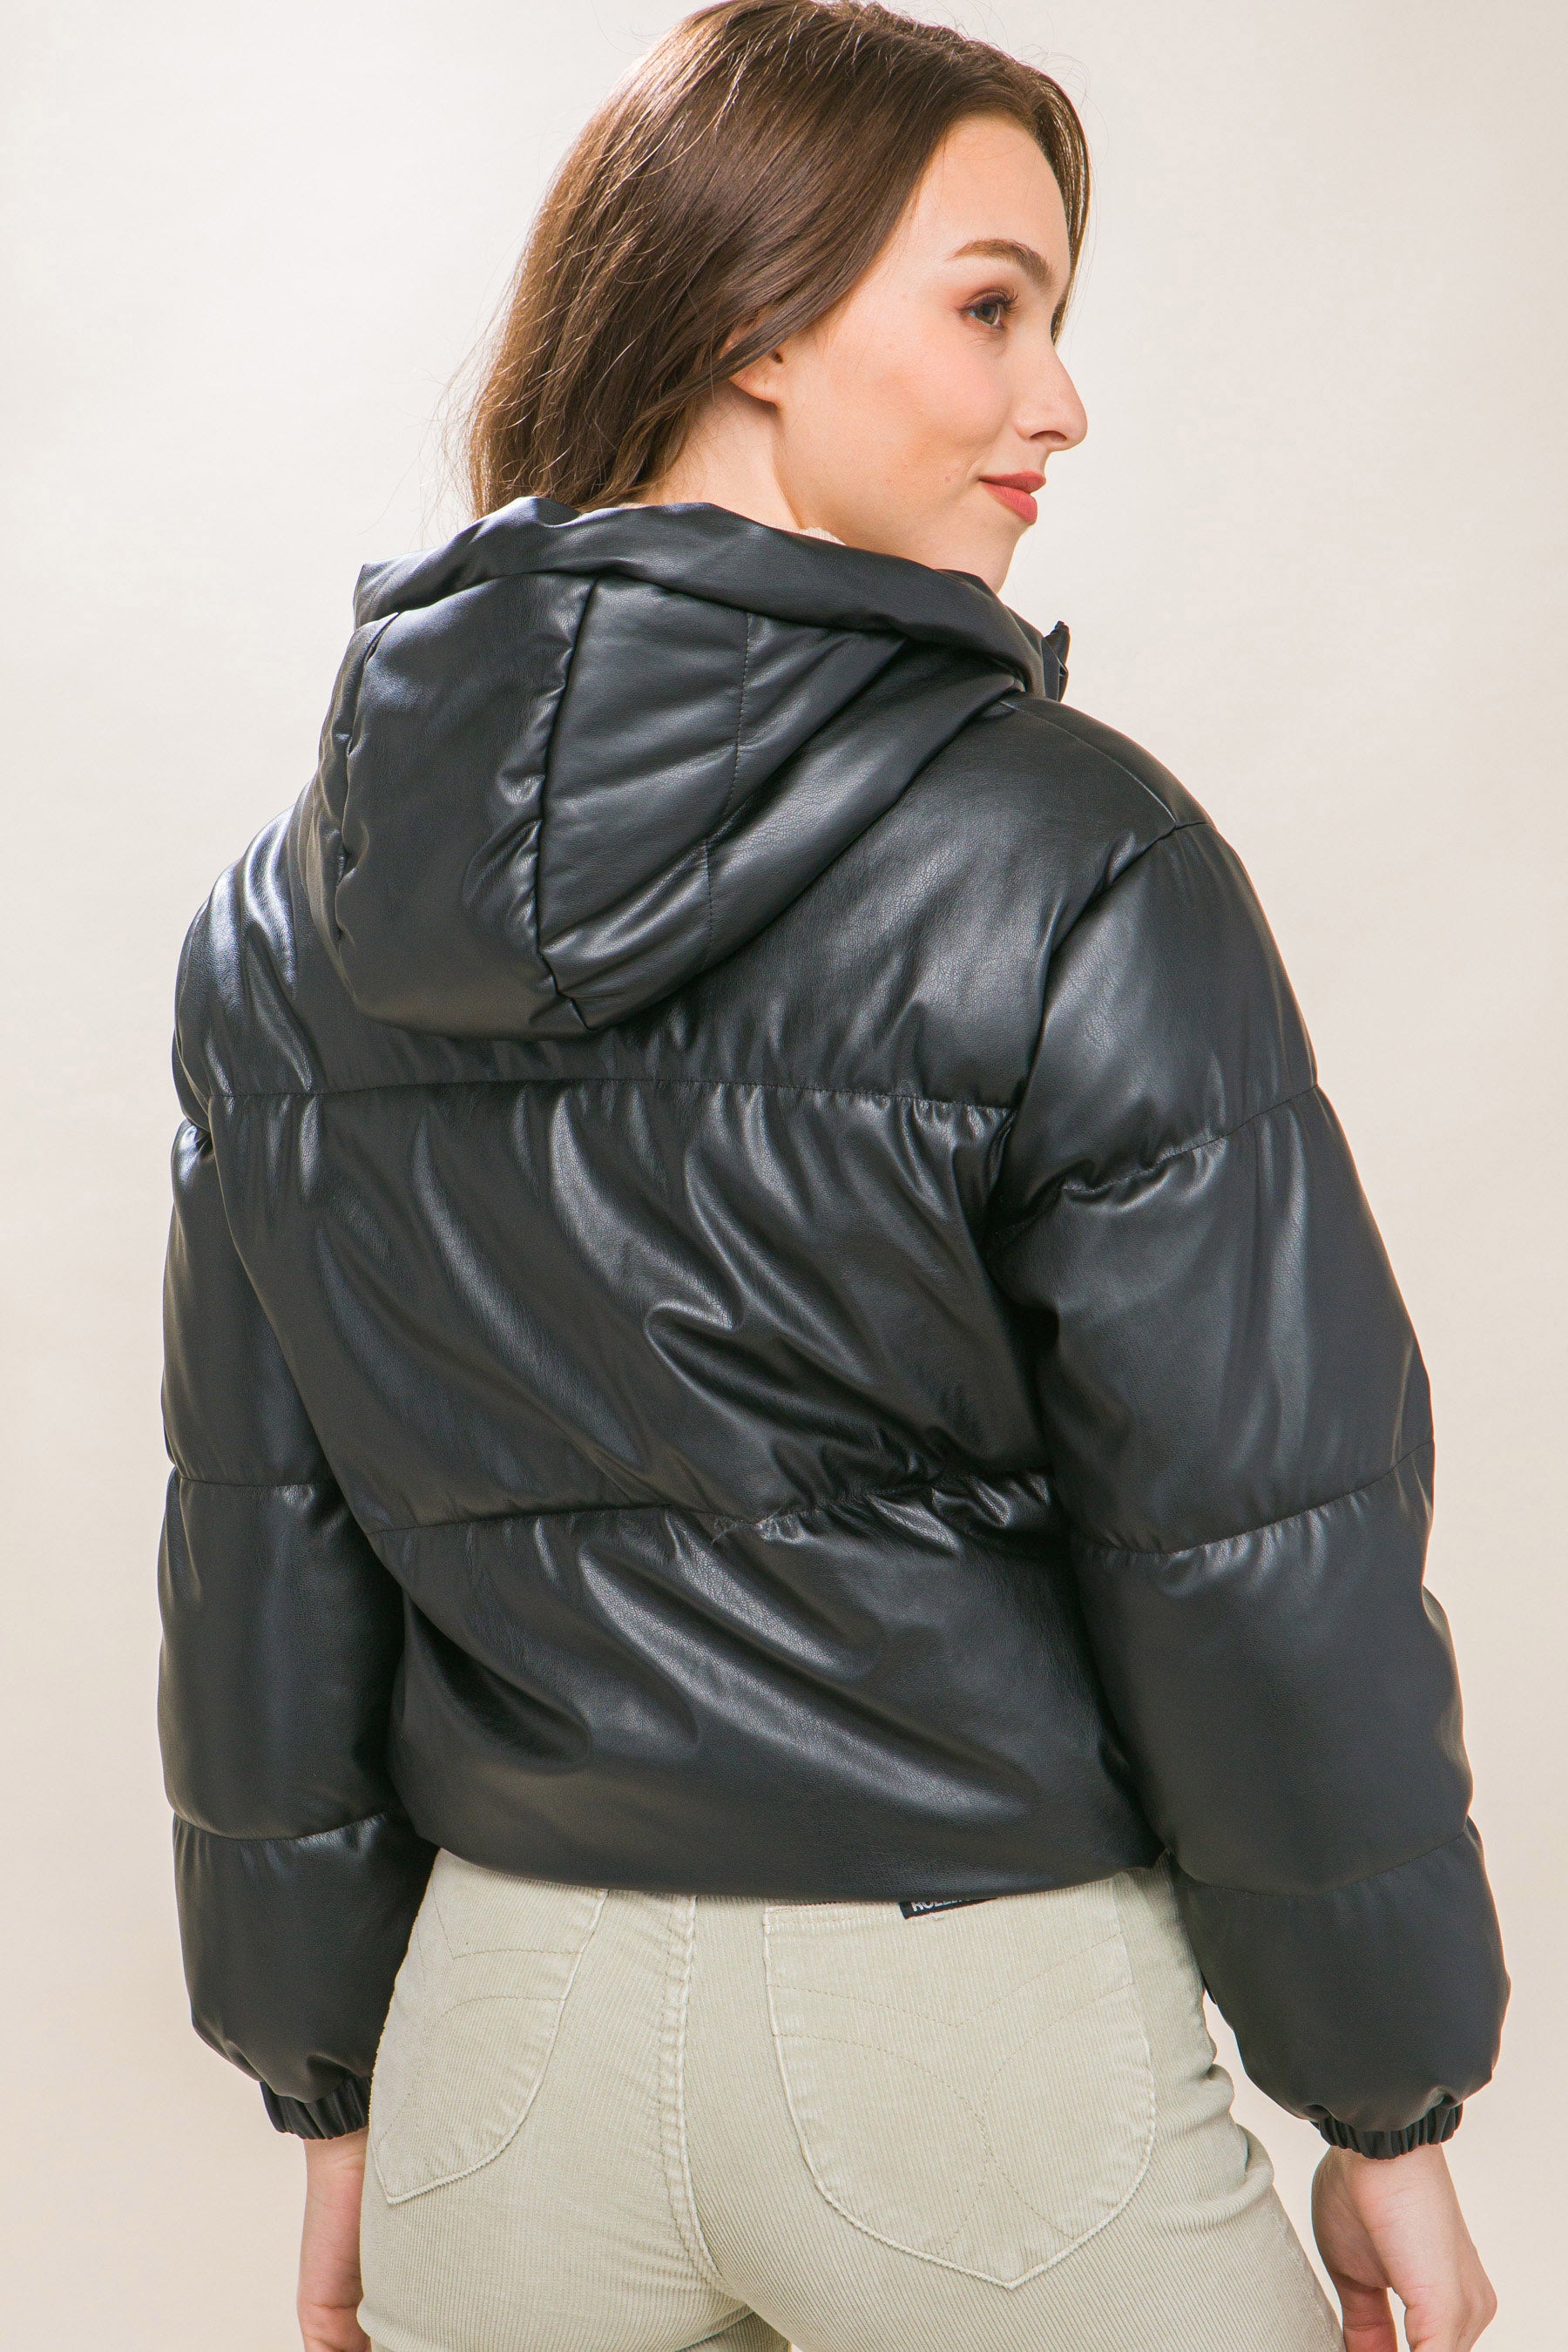 THE HYPE Pu Faux Leather Zipper Hooded Puffer Jacket